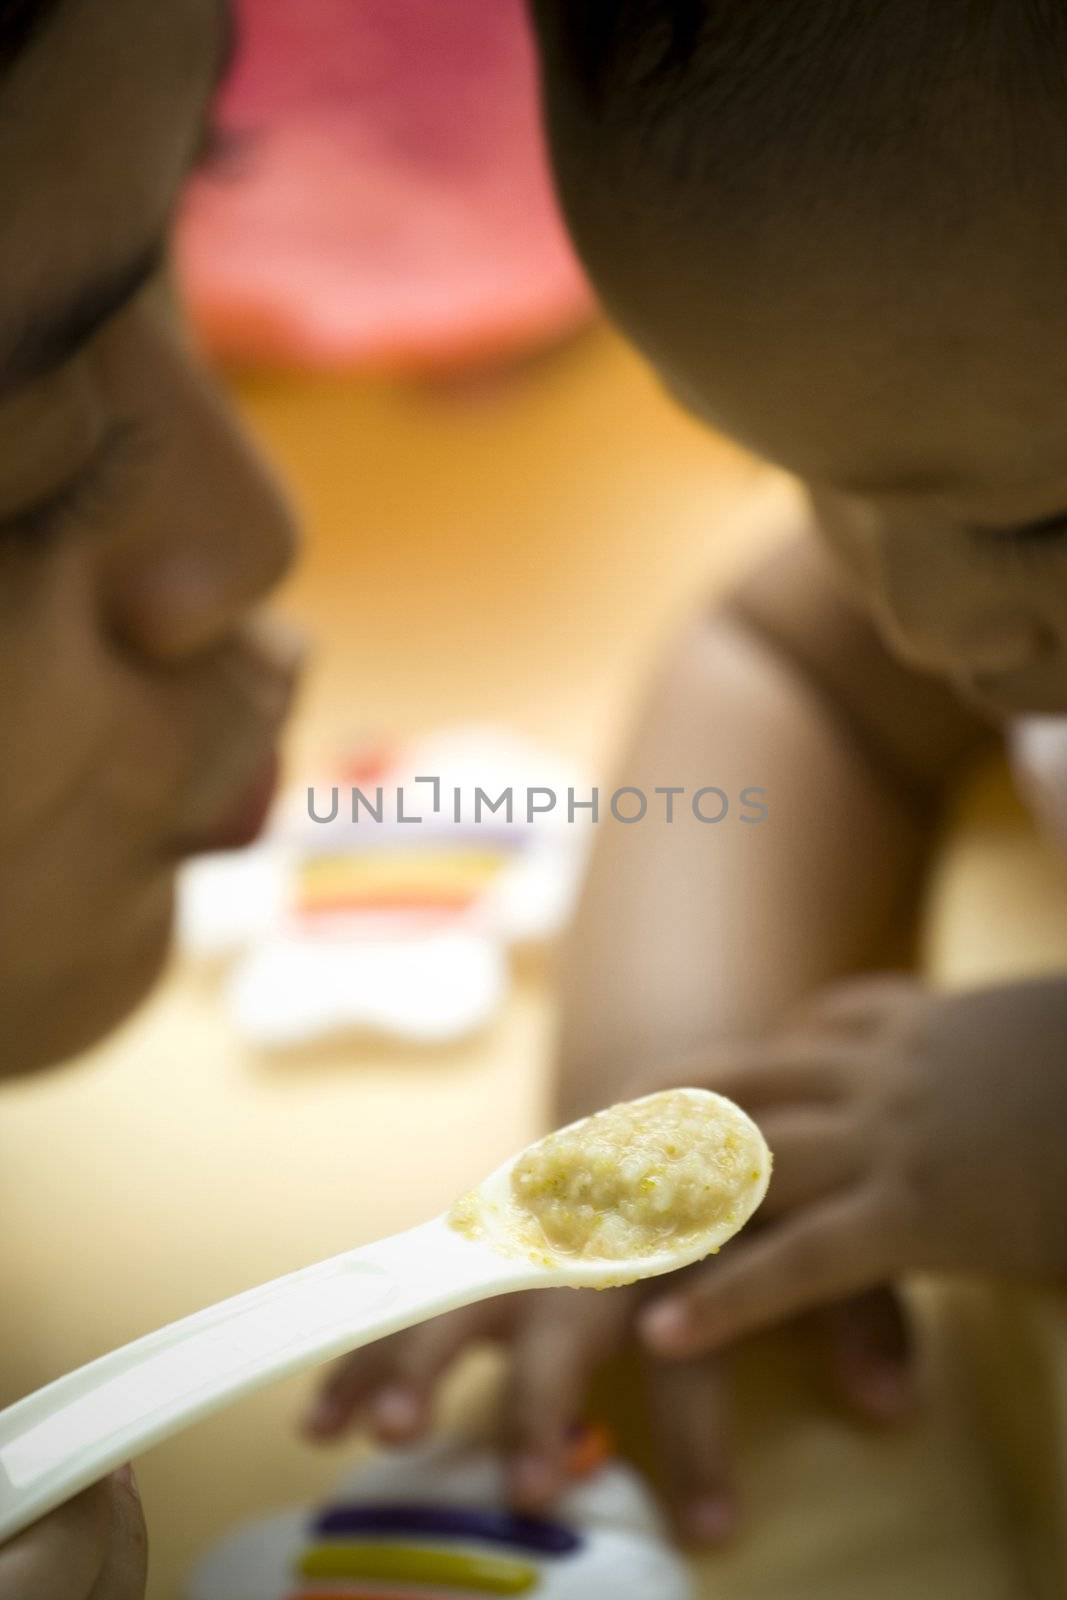 mother persuade her baby to eat during meal time. selective focused on the meal on spoon. intentionally underexposed background